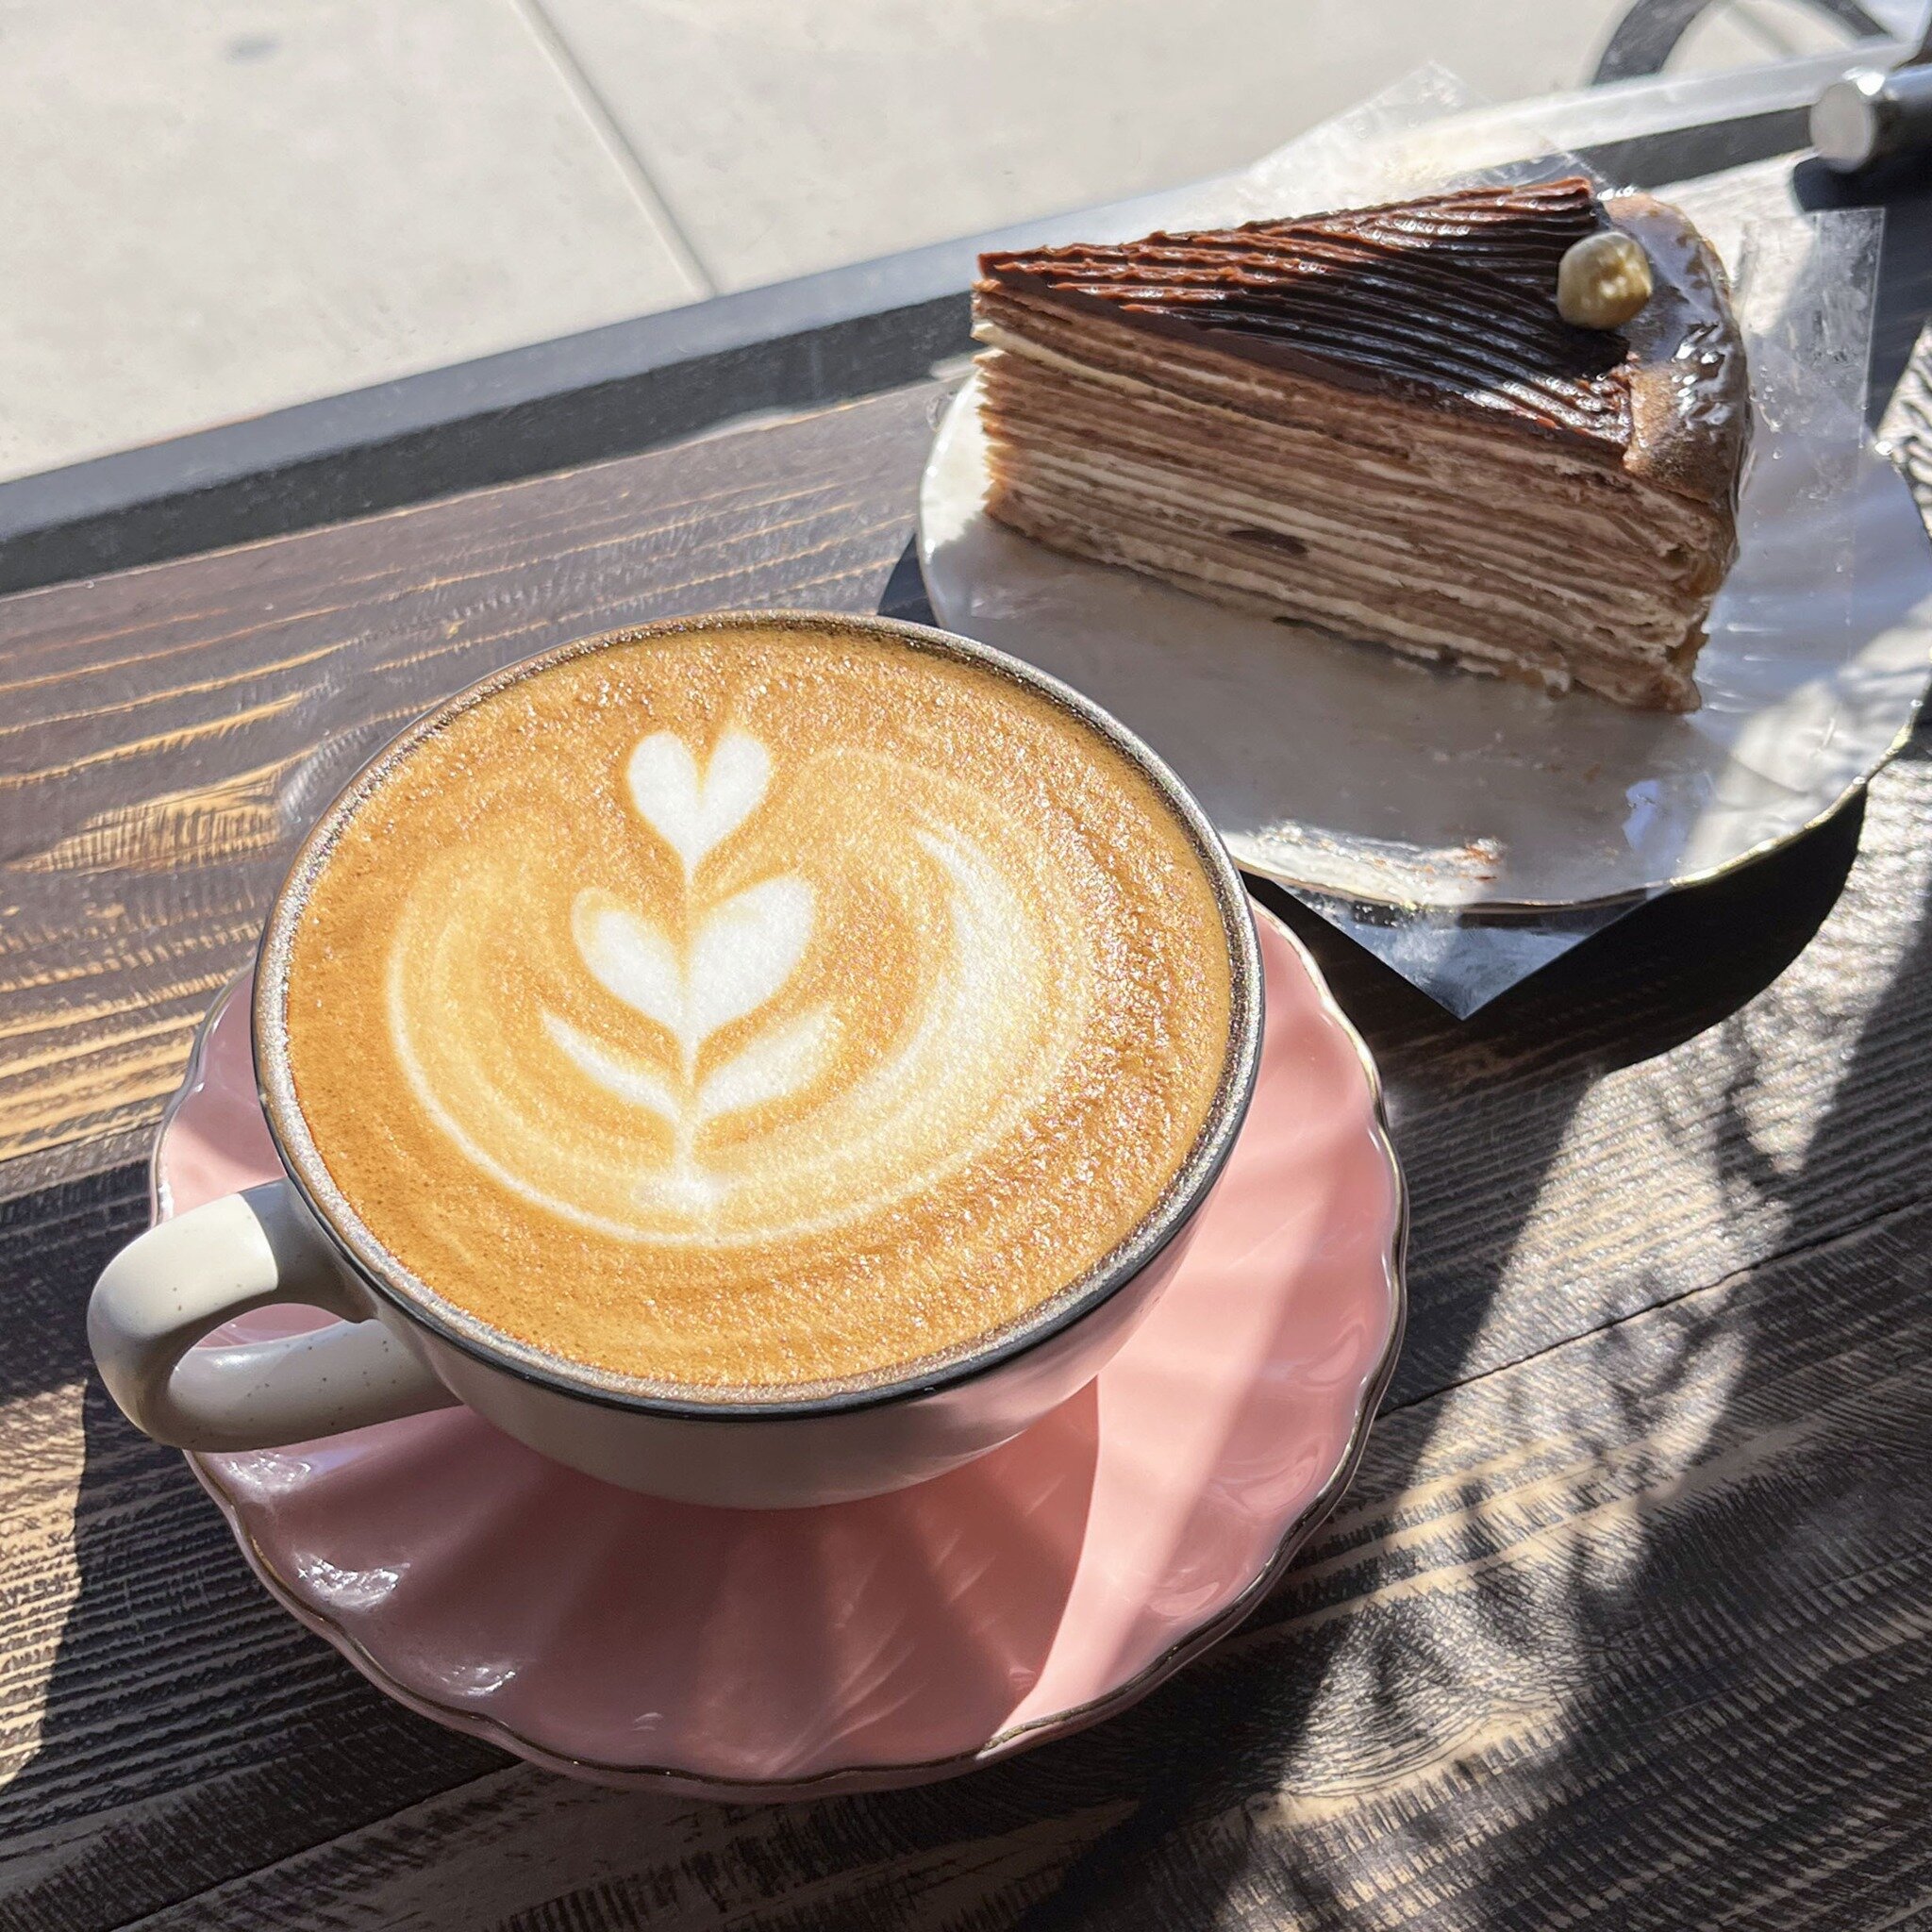 🥶It&rsquo;s been a chilly weekend in Vegas! Why don&rsquo;t we wind down with a cup of hot latte and your favorite slice of cake?😌☕️🍰✨ Let&rsquo;s get ready for that warmer spring weather at G&auml;bi!

🚗 Available on Uber Eats, Grubhub, &amp; Do